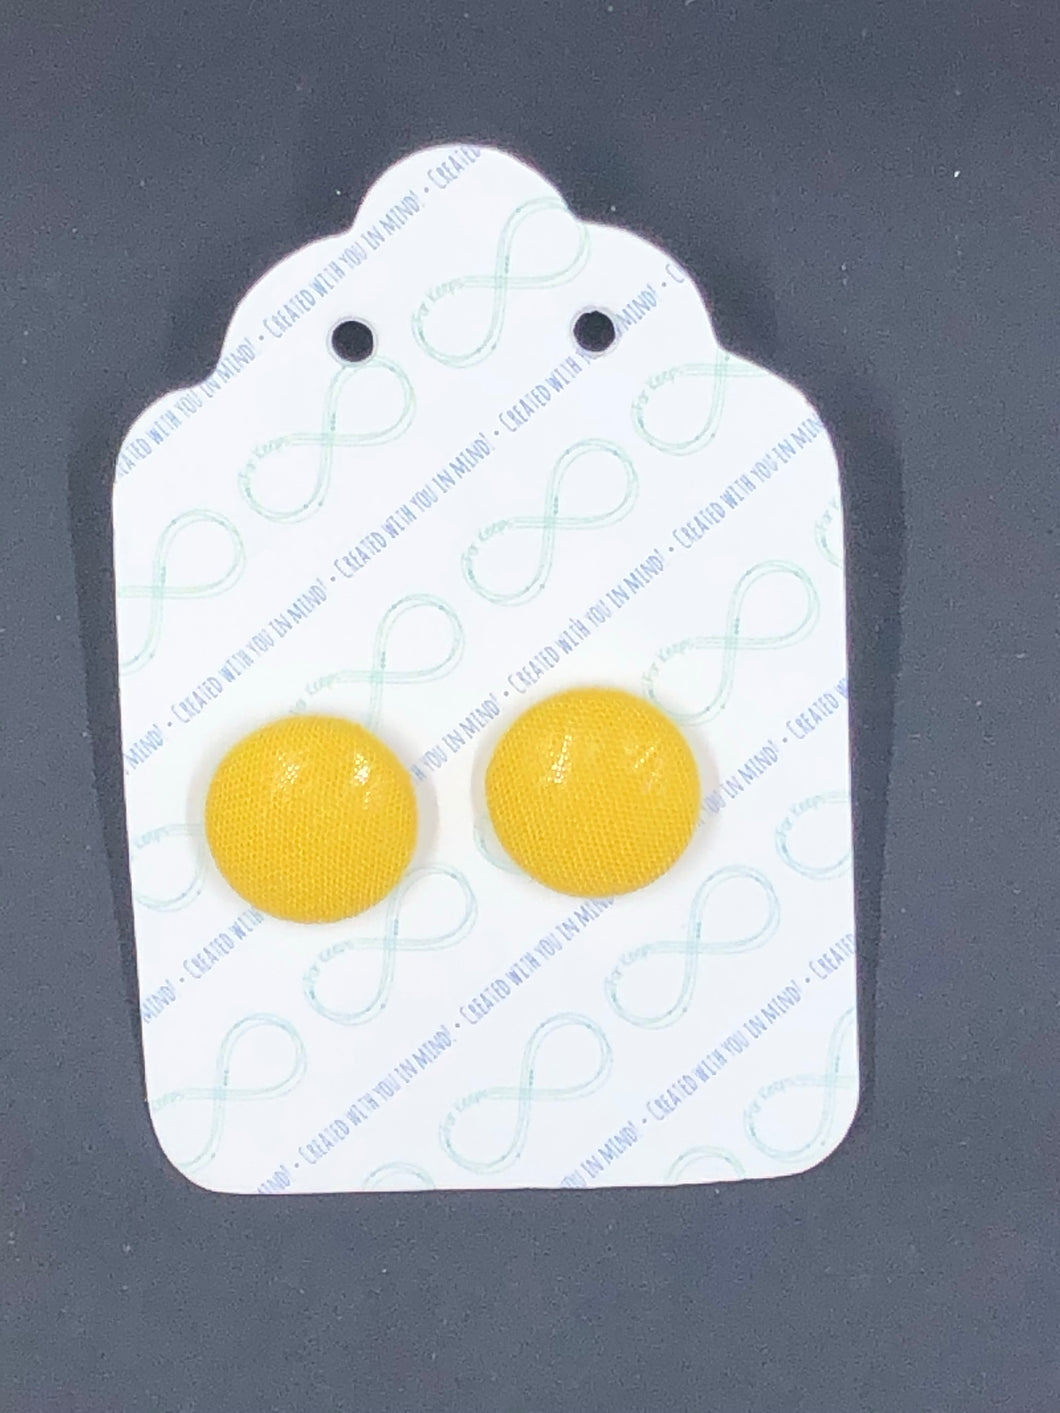 For Keeps Medium Yellow Button Studs